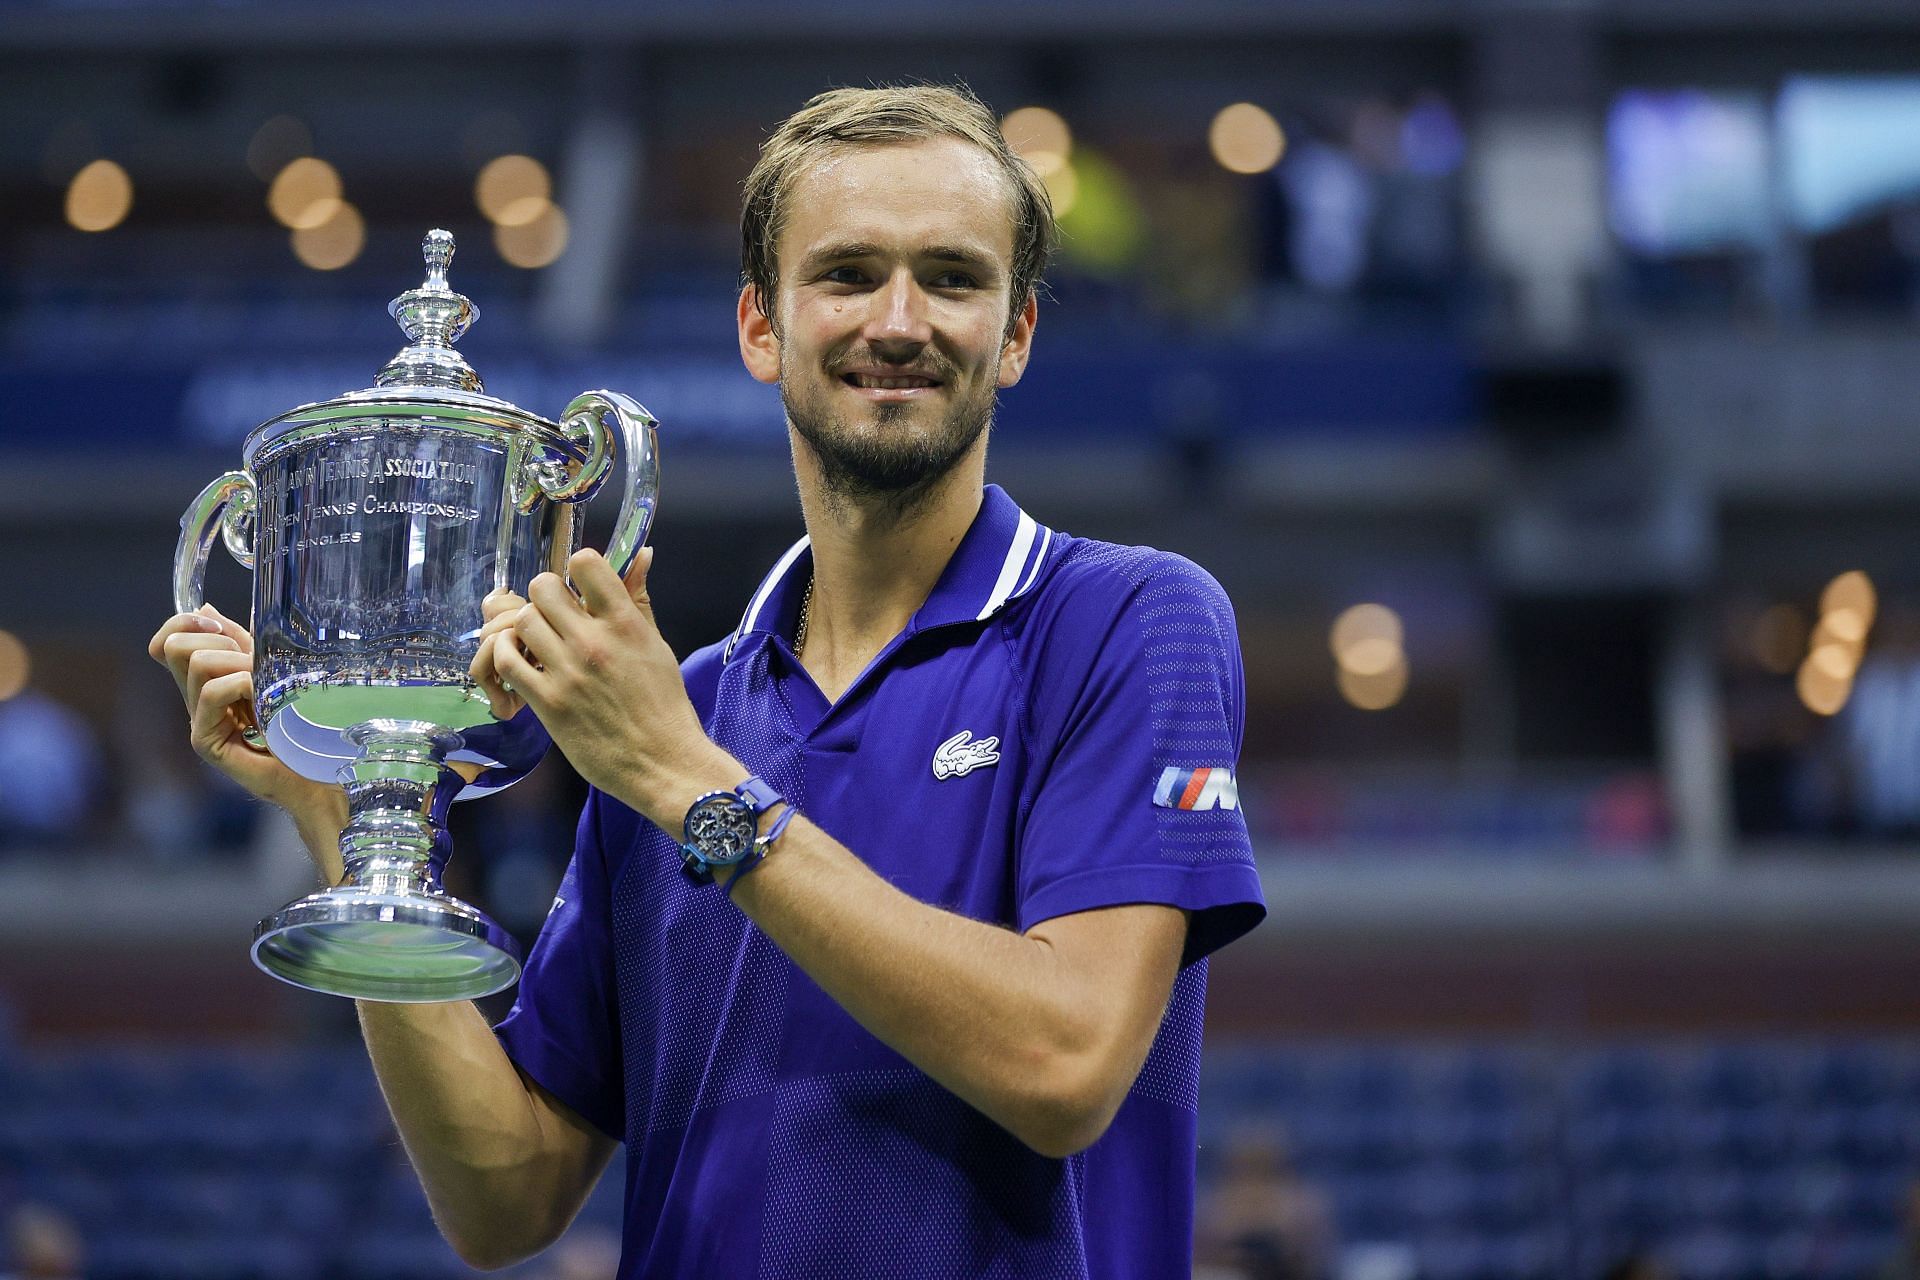 Daniil Medvedev at the 2021 US Open - Day 14